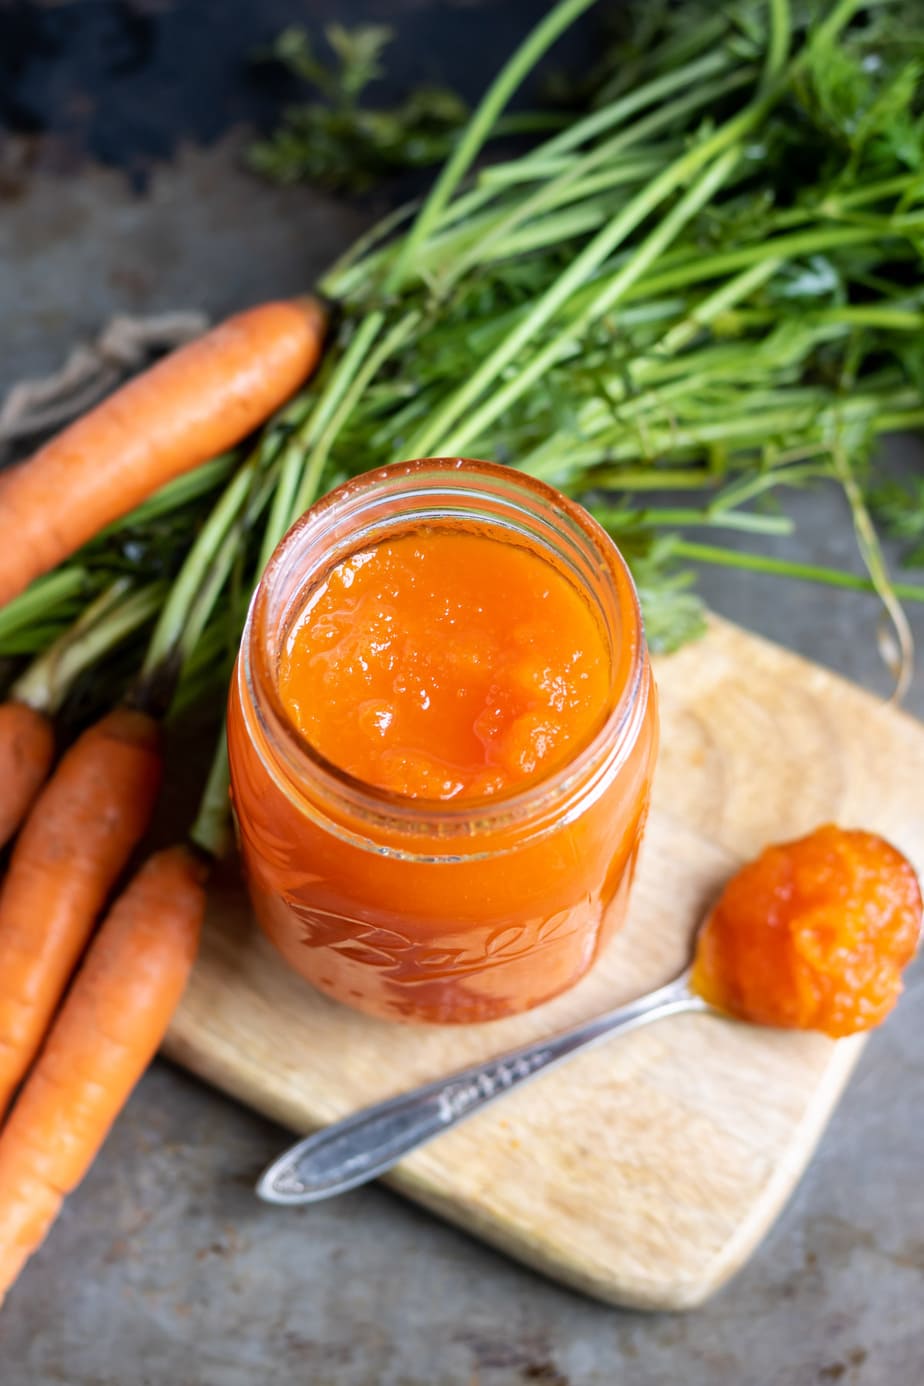 Looking down at a jar of jam with carrots and a spoonful next to it.